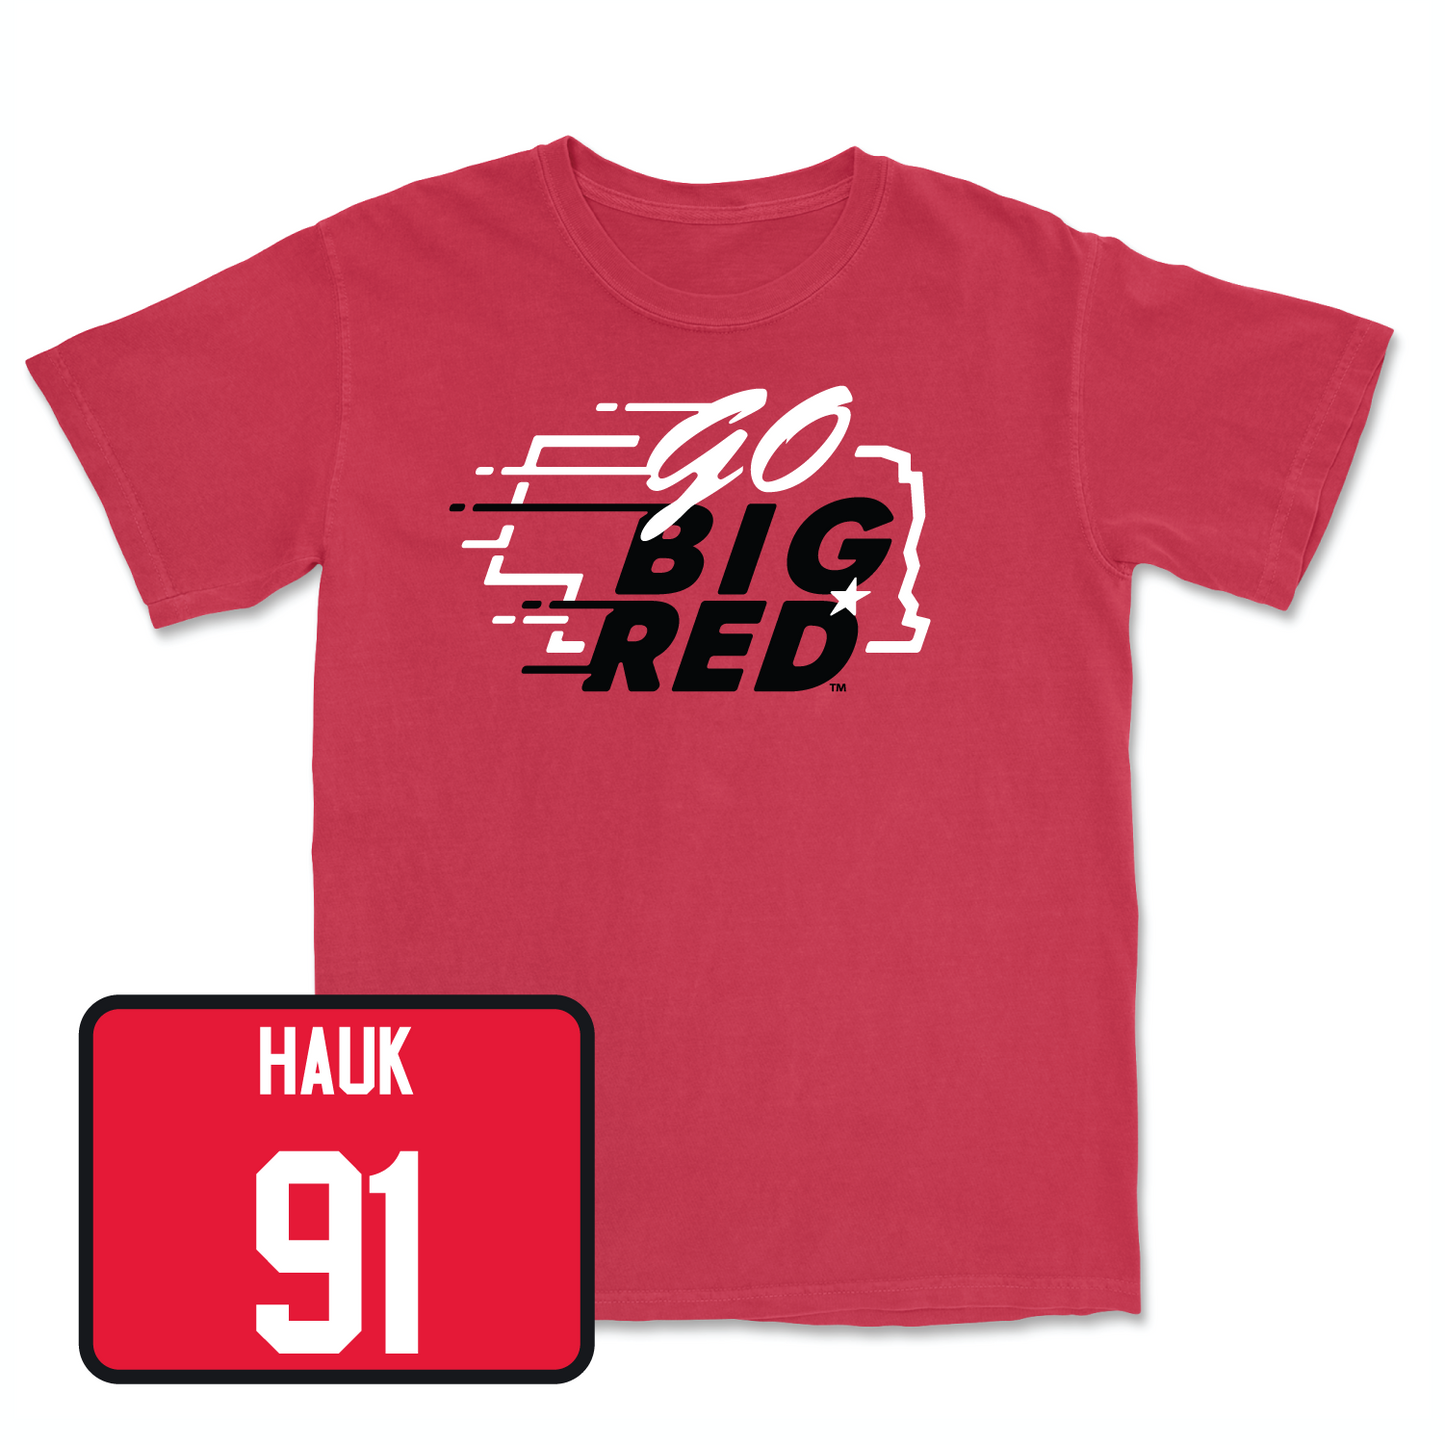 Red Women's Soccer GBR Tee Youth Large / Sami Hauk | #91